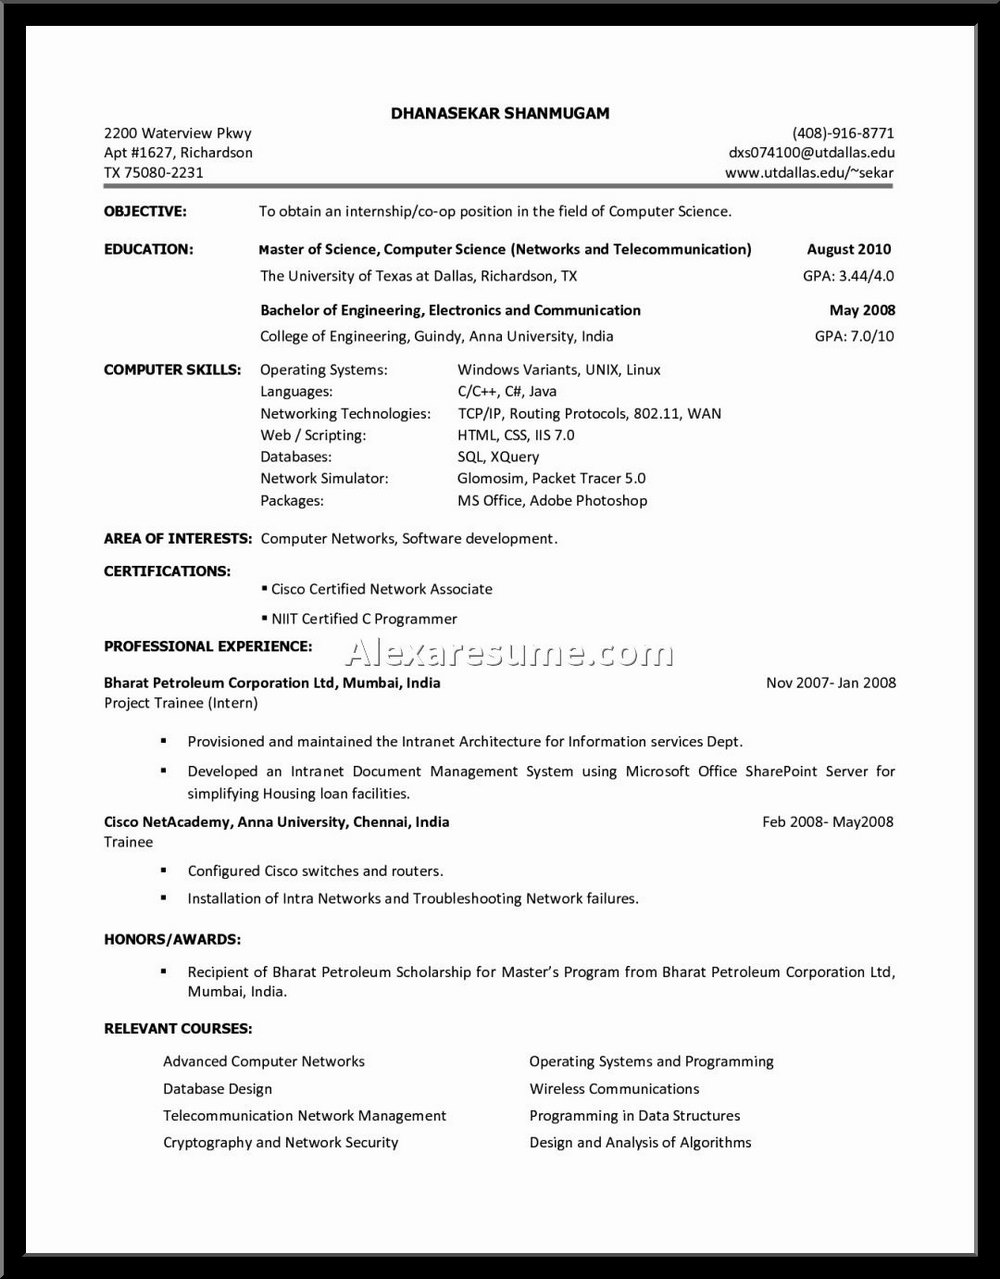 absolutely free resume, absolutely free resume builder, absolutely free resume templates, absolutely free resume template download, absolutely free resume creator, absolutely free resume downloads, absolutely free resume formats absolutely free resume maker absolutely free printable resume templates absolutely free resume writer download best absolutely